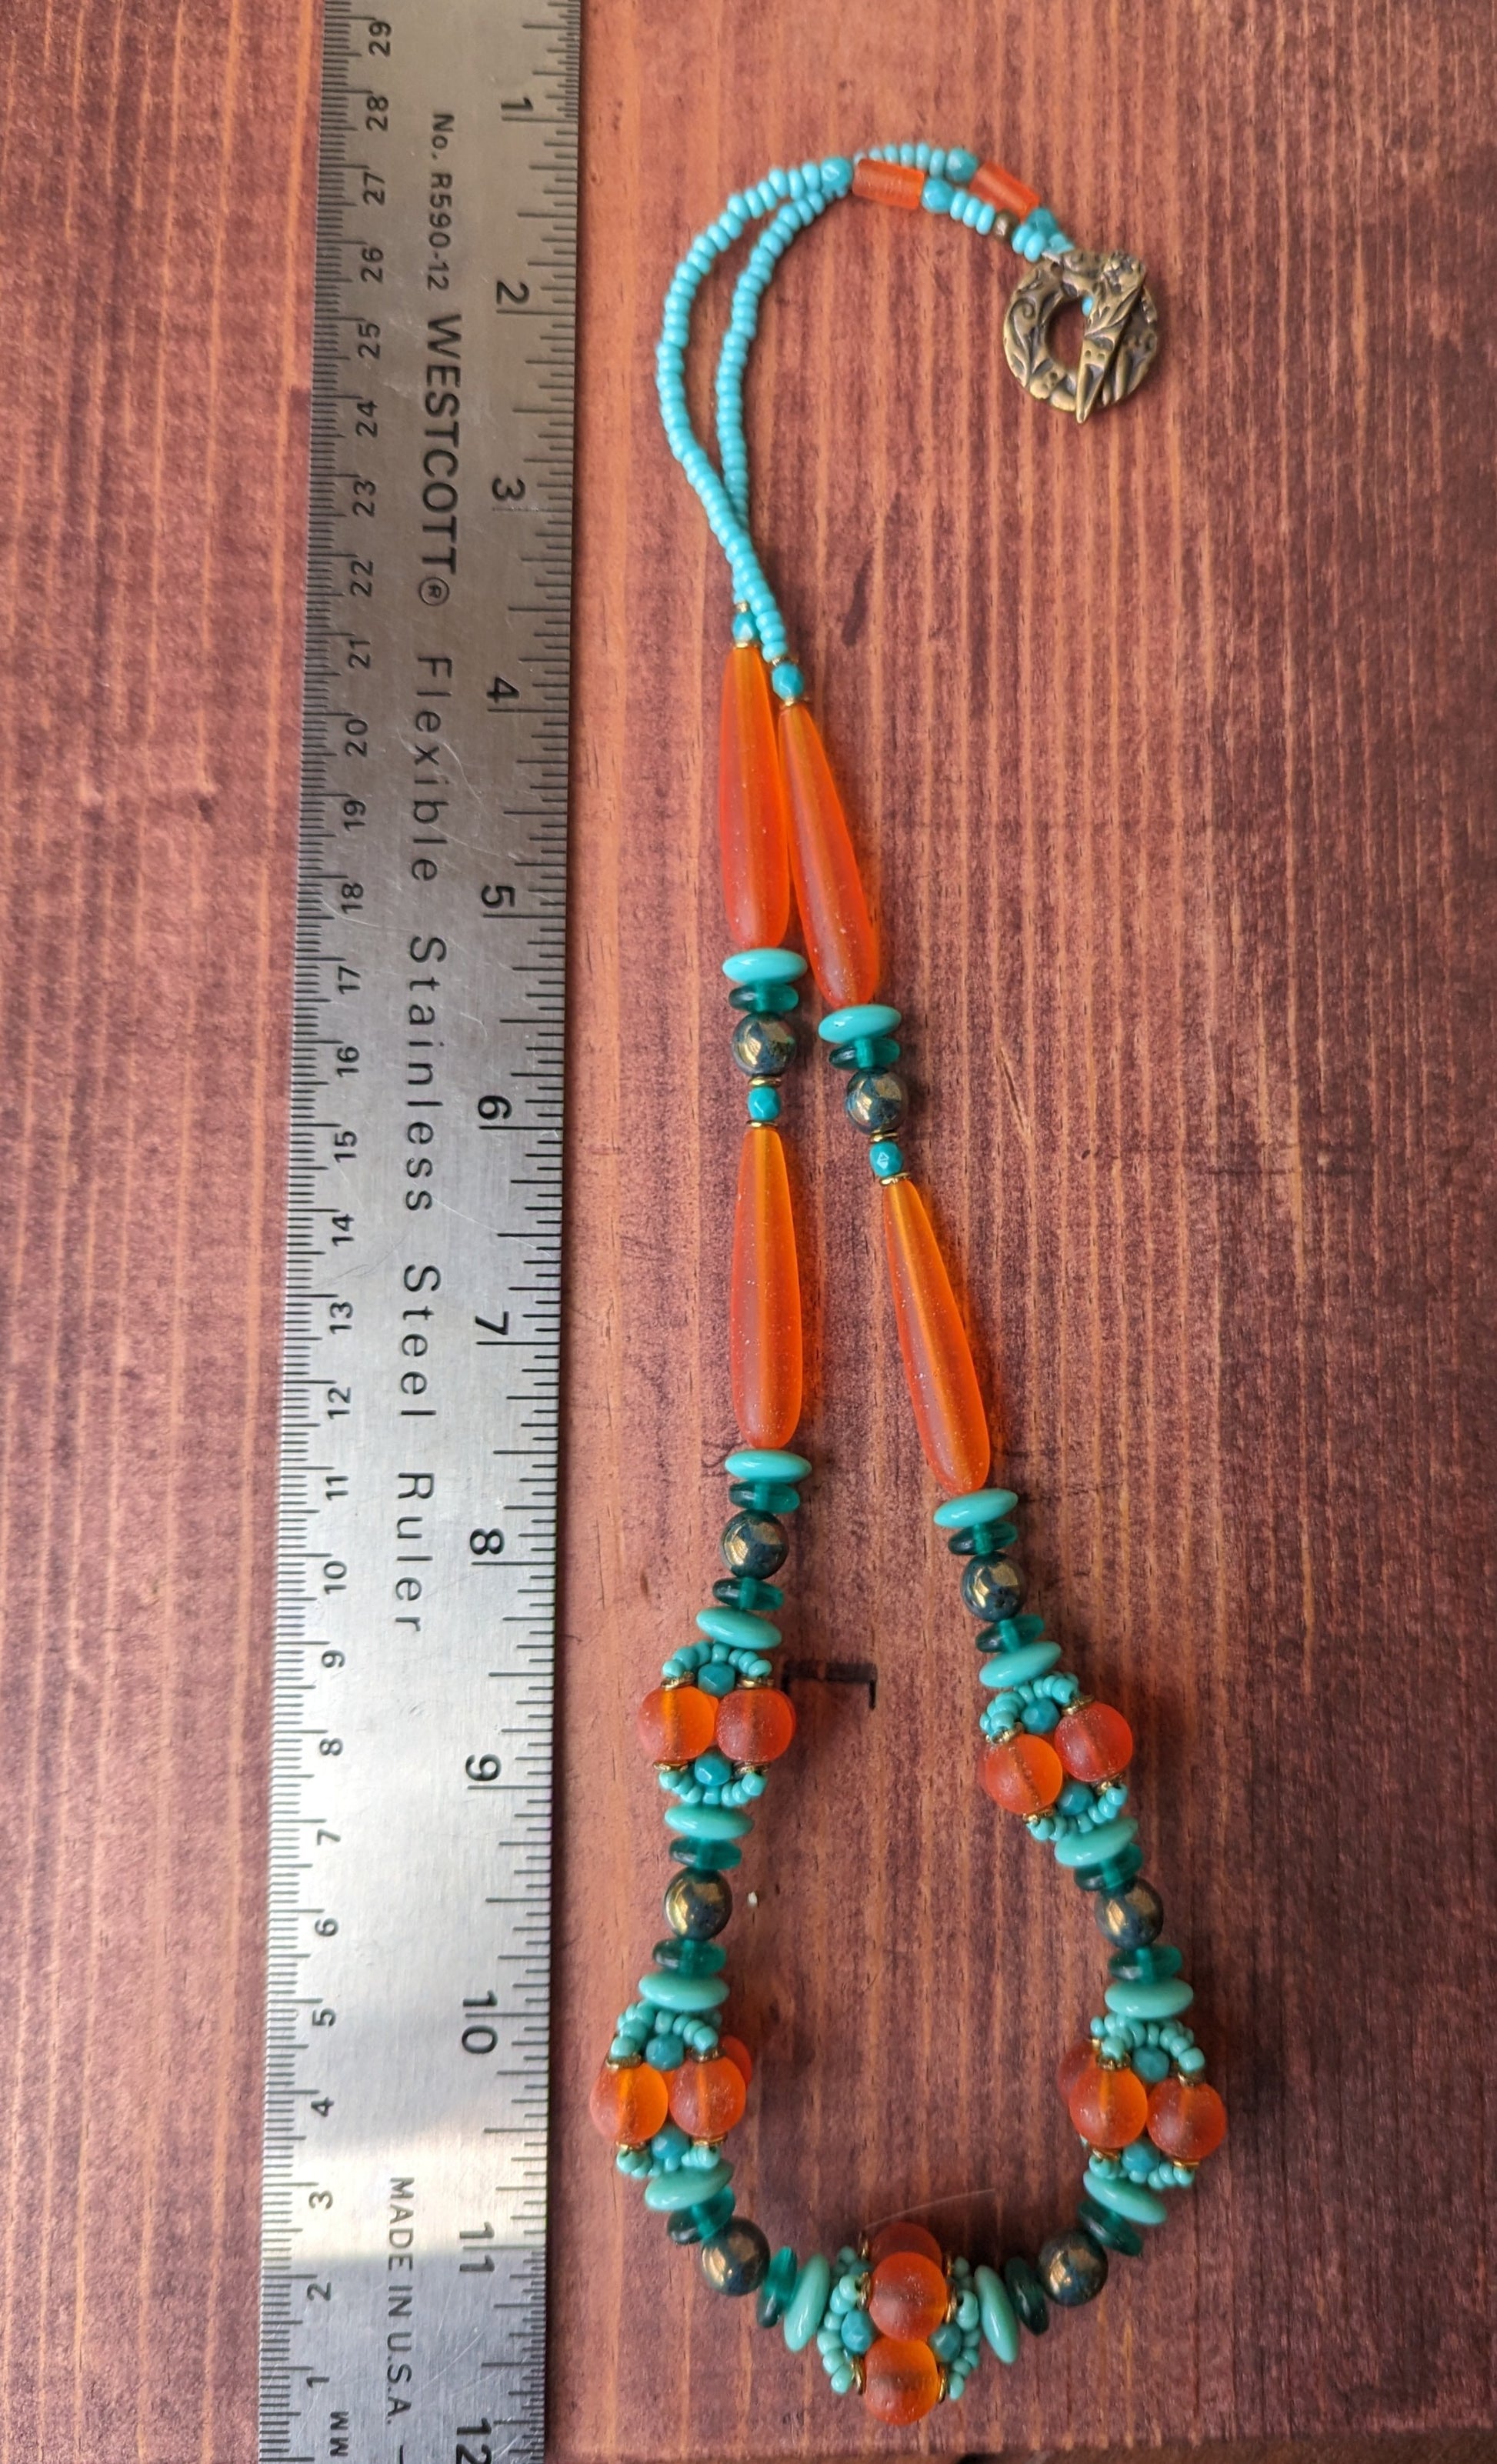 A statement necklace, photographed from above, on a reddish wood board. A twelve inch ruler lays next to the necklace. The necklace has frosted orange beads alternating with dark to light shades of turquoise. At the bottom of the necklace, there are five clusters of beads that have been woven into an orb.